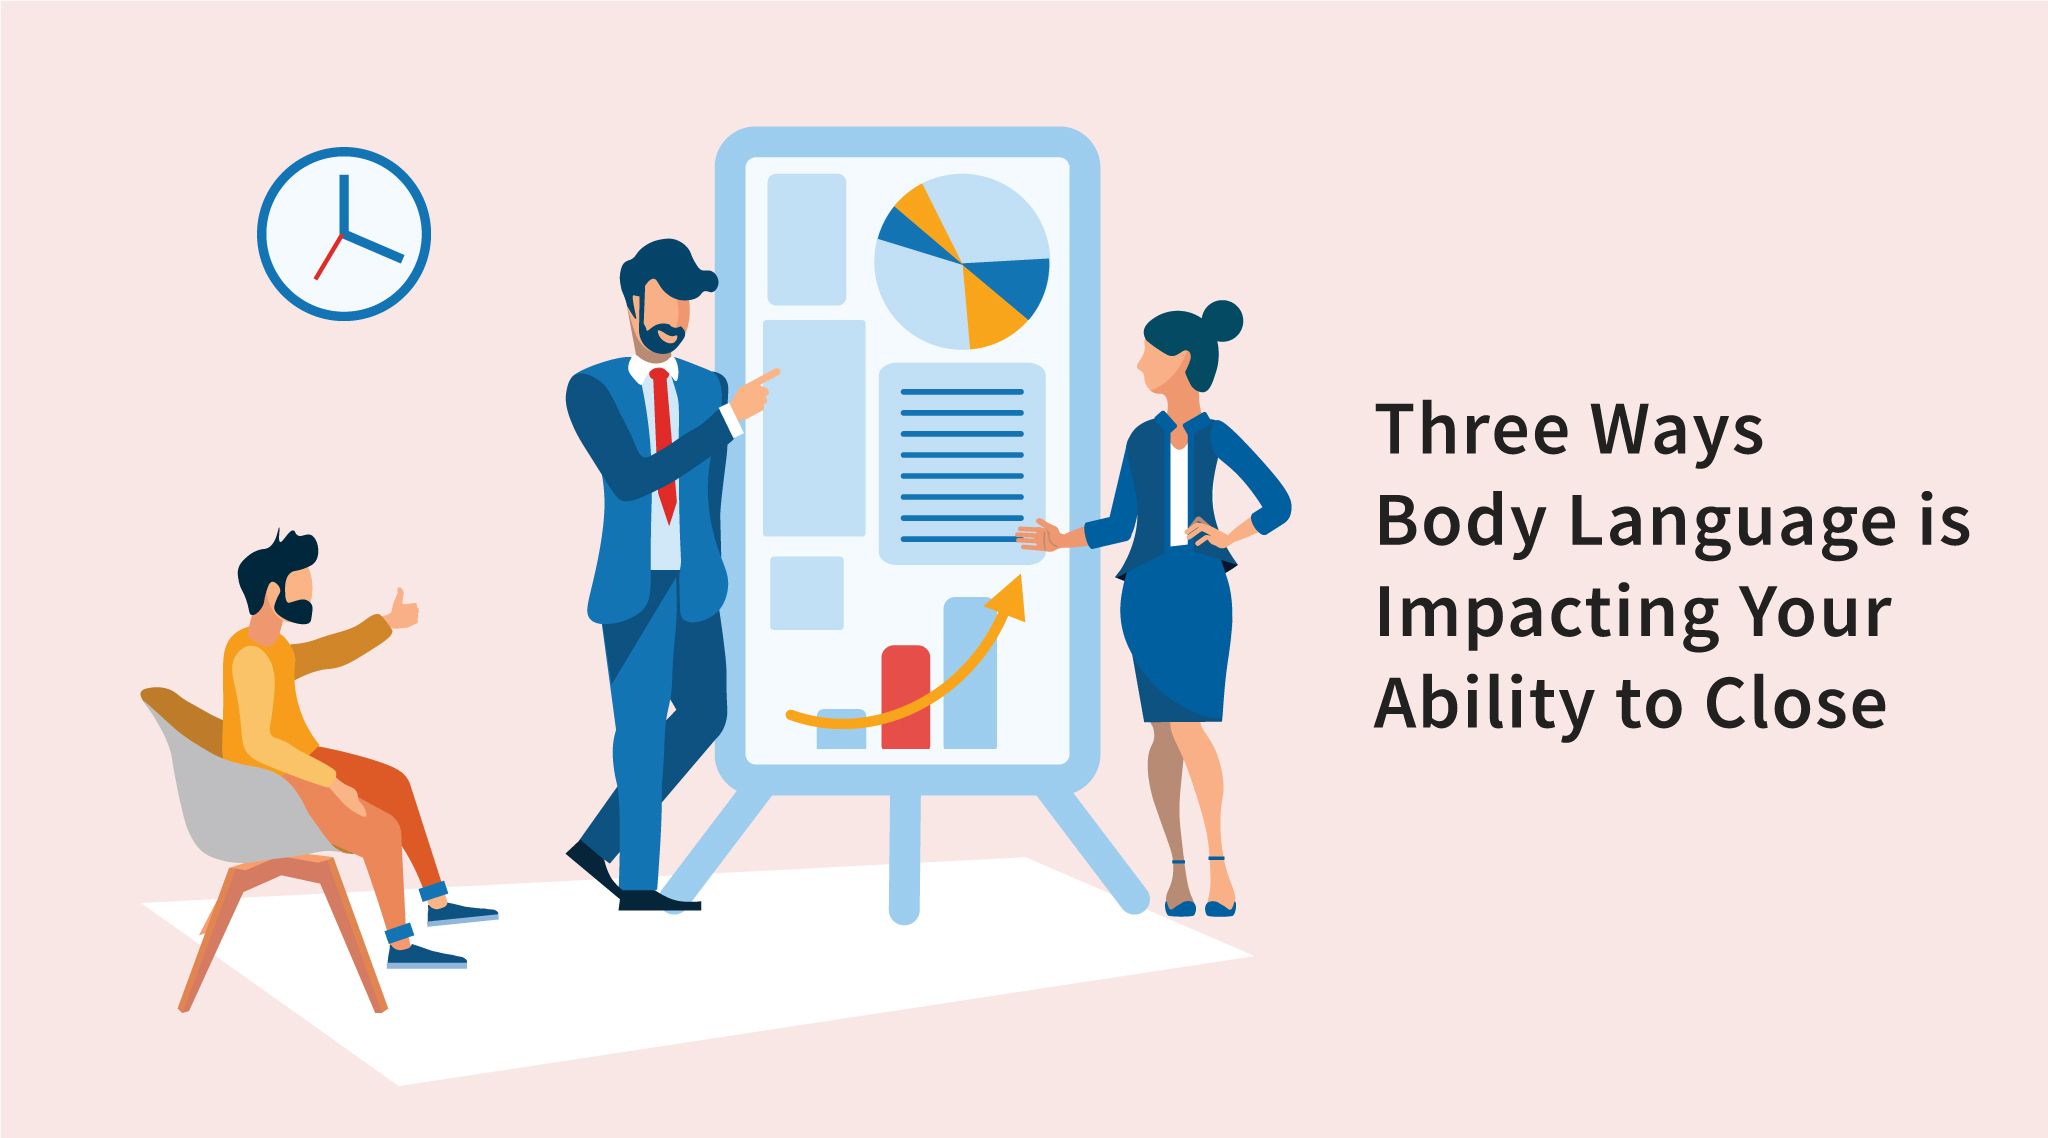 Three Ways Body Language is Impacting Your Ability to Close